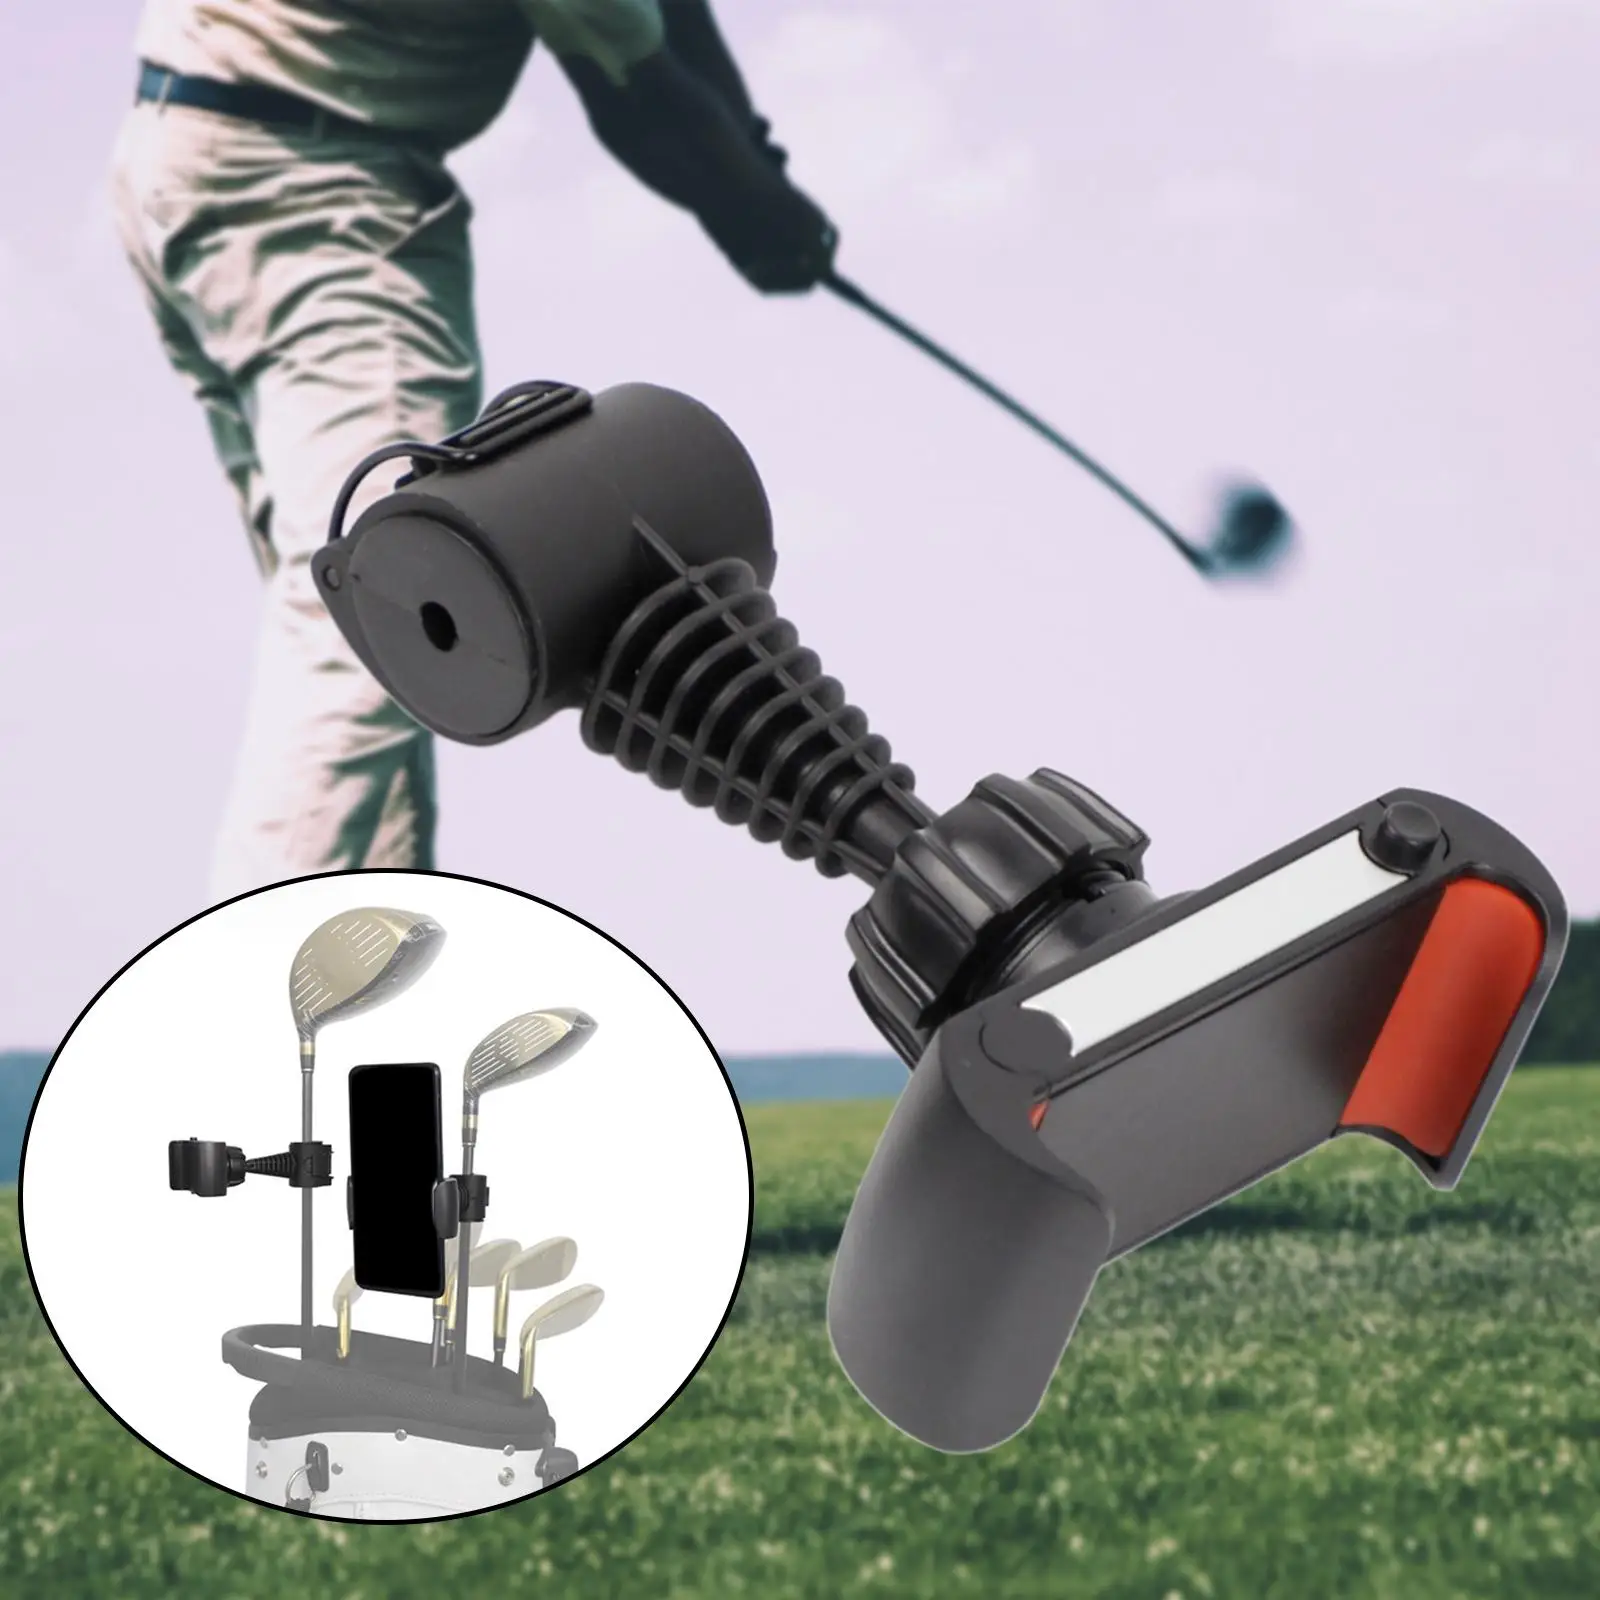 Golf Phone Holder Clip Replacement Durable Tools 360 Degree Alignment Sticks Bracket for Swing Recording Phone Short Game